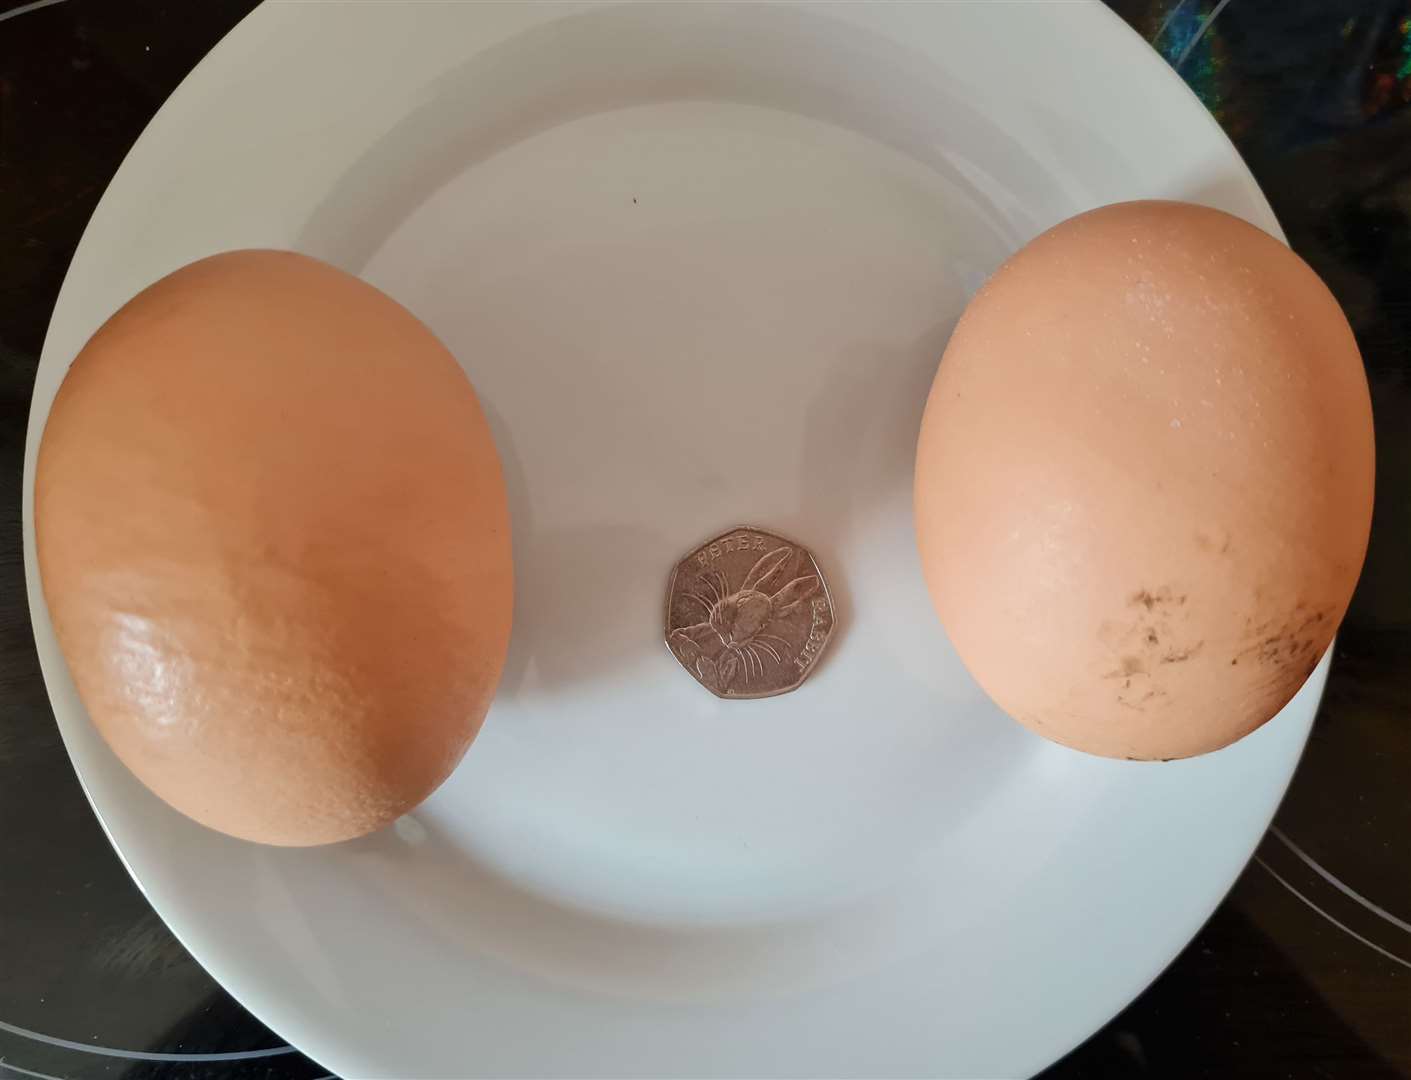 A 50 pence piece gives a sense of scale. Picture: Samantha Oliver